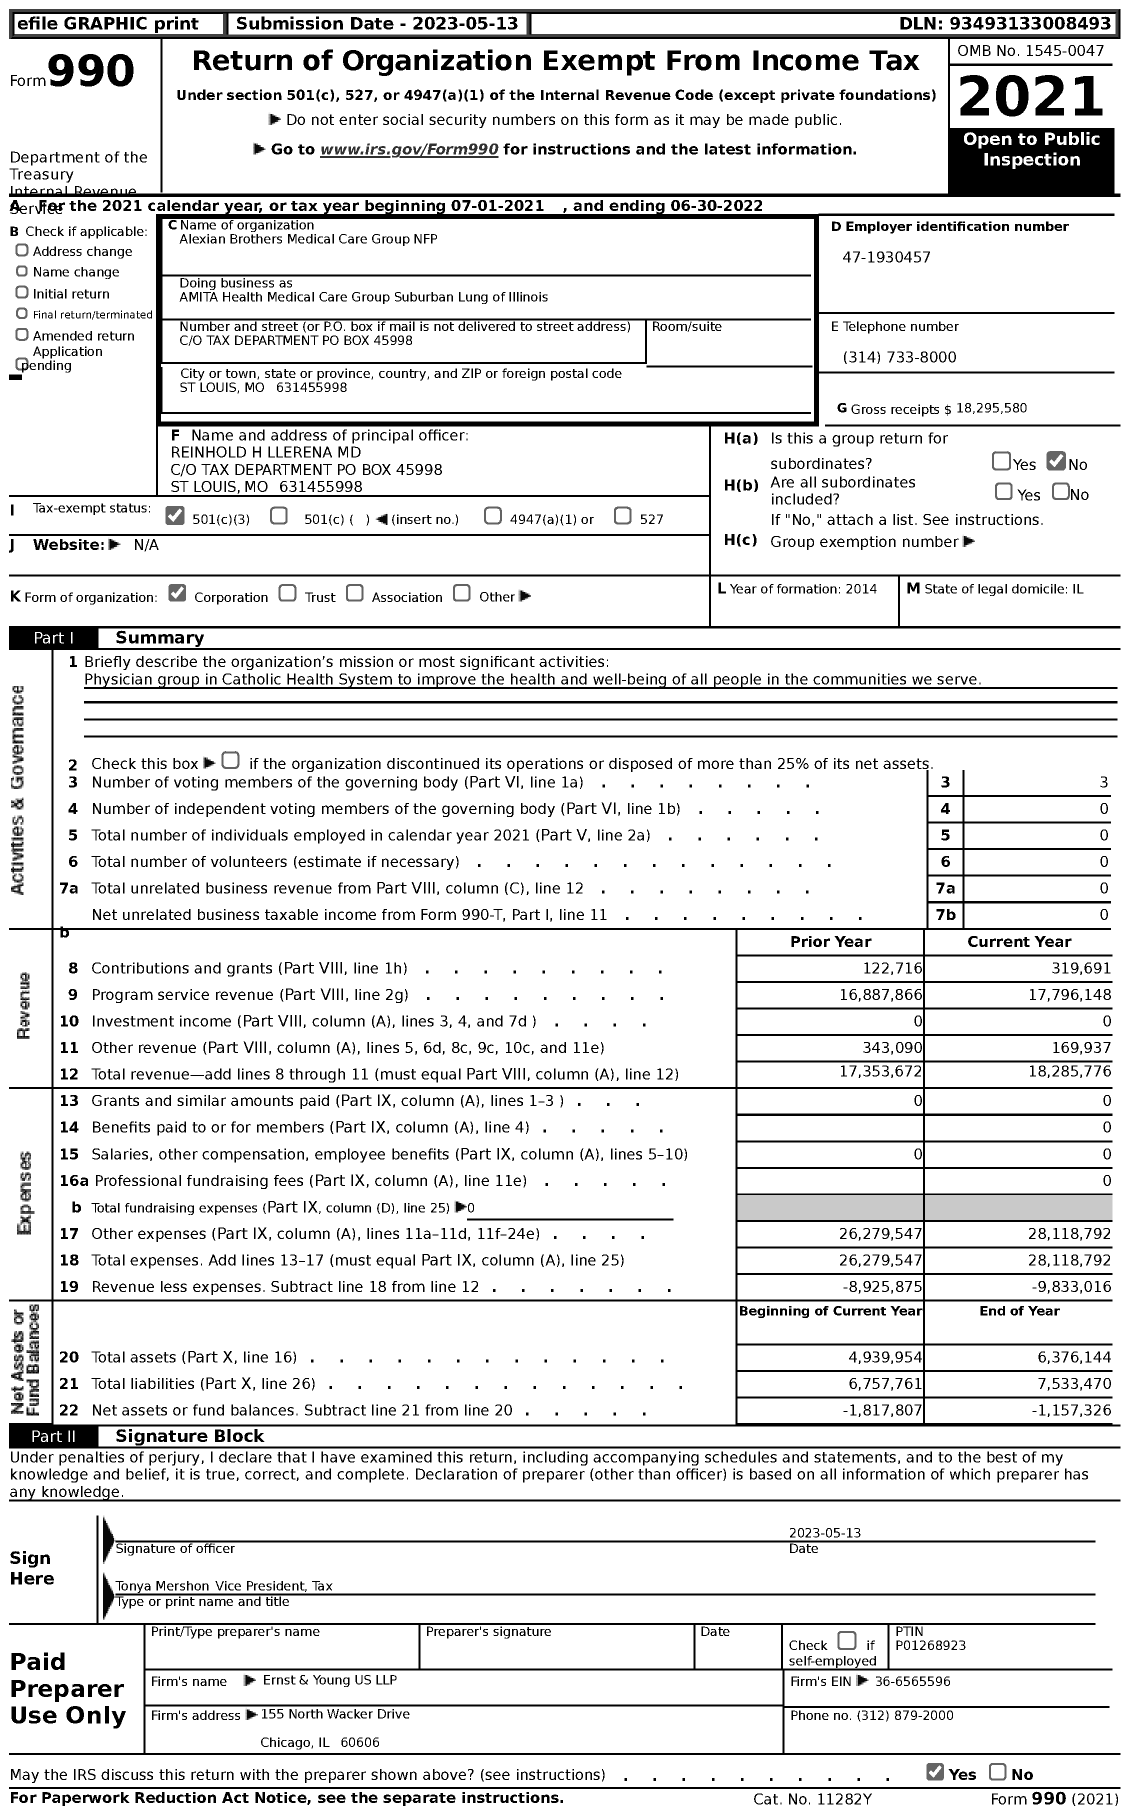 Image of first page of 2021 Form 990 for AMITA Health Medical Care Group Suburban Lung of Illinois